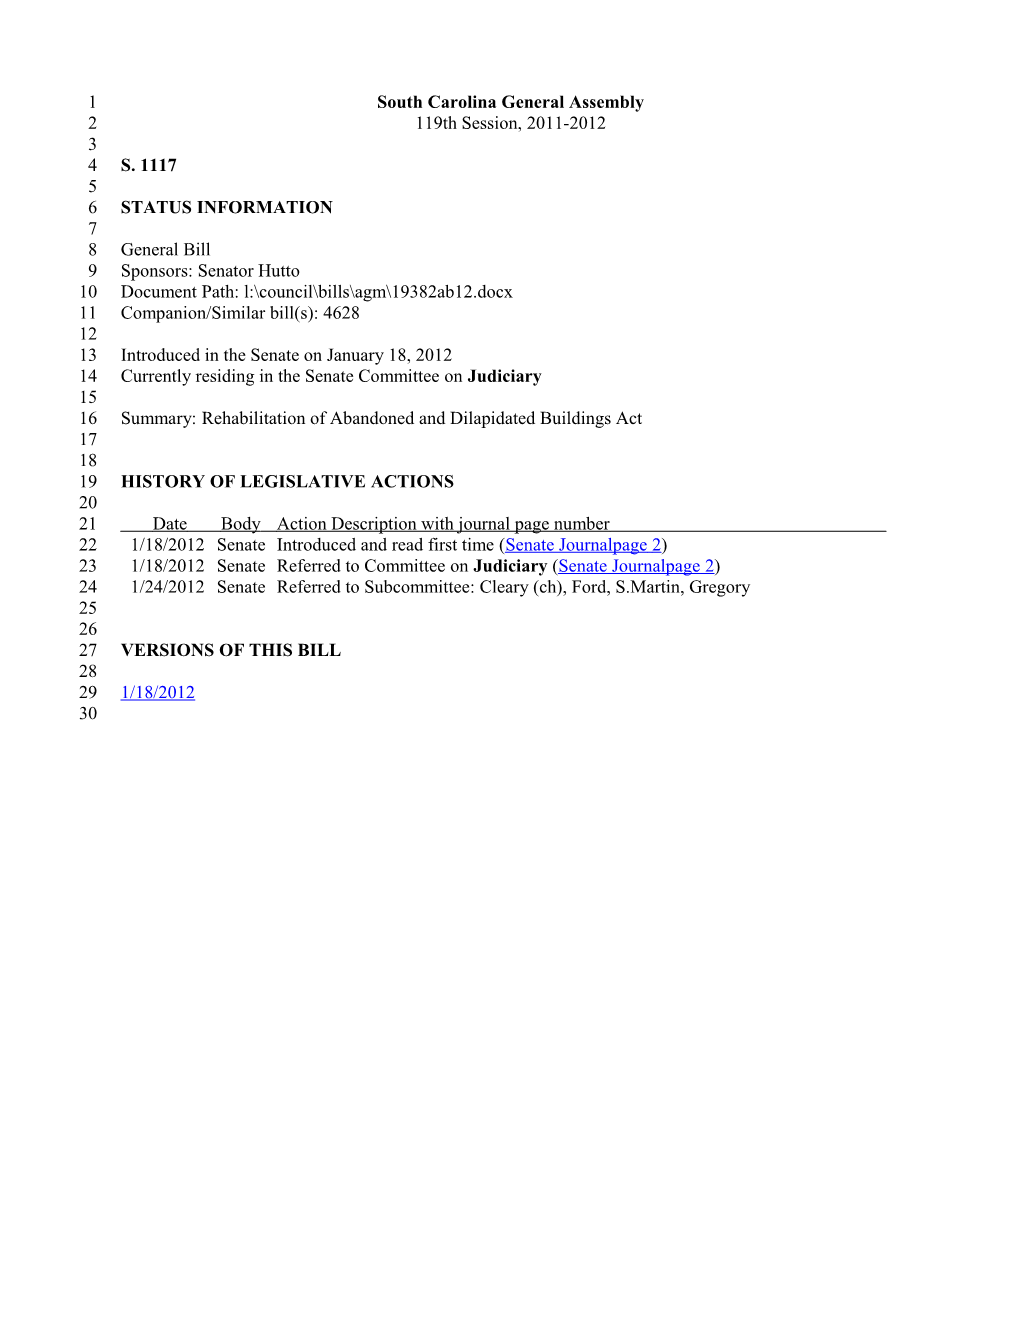 2011-2012 Bill 1117: Rehabilitation of Abandoned and Dilapidated Buildings Act - South